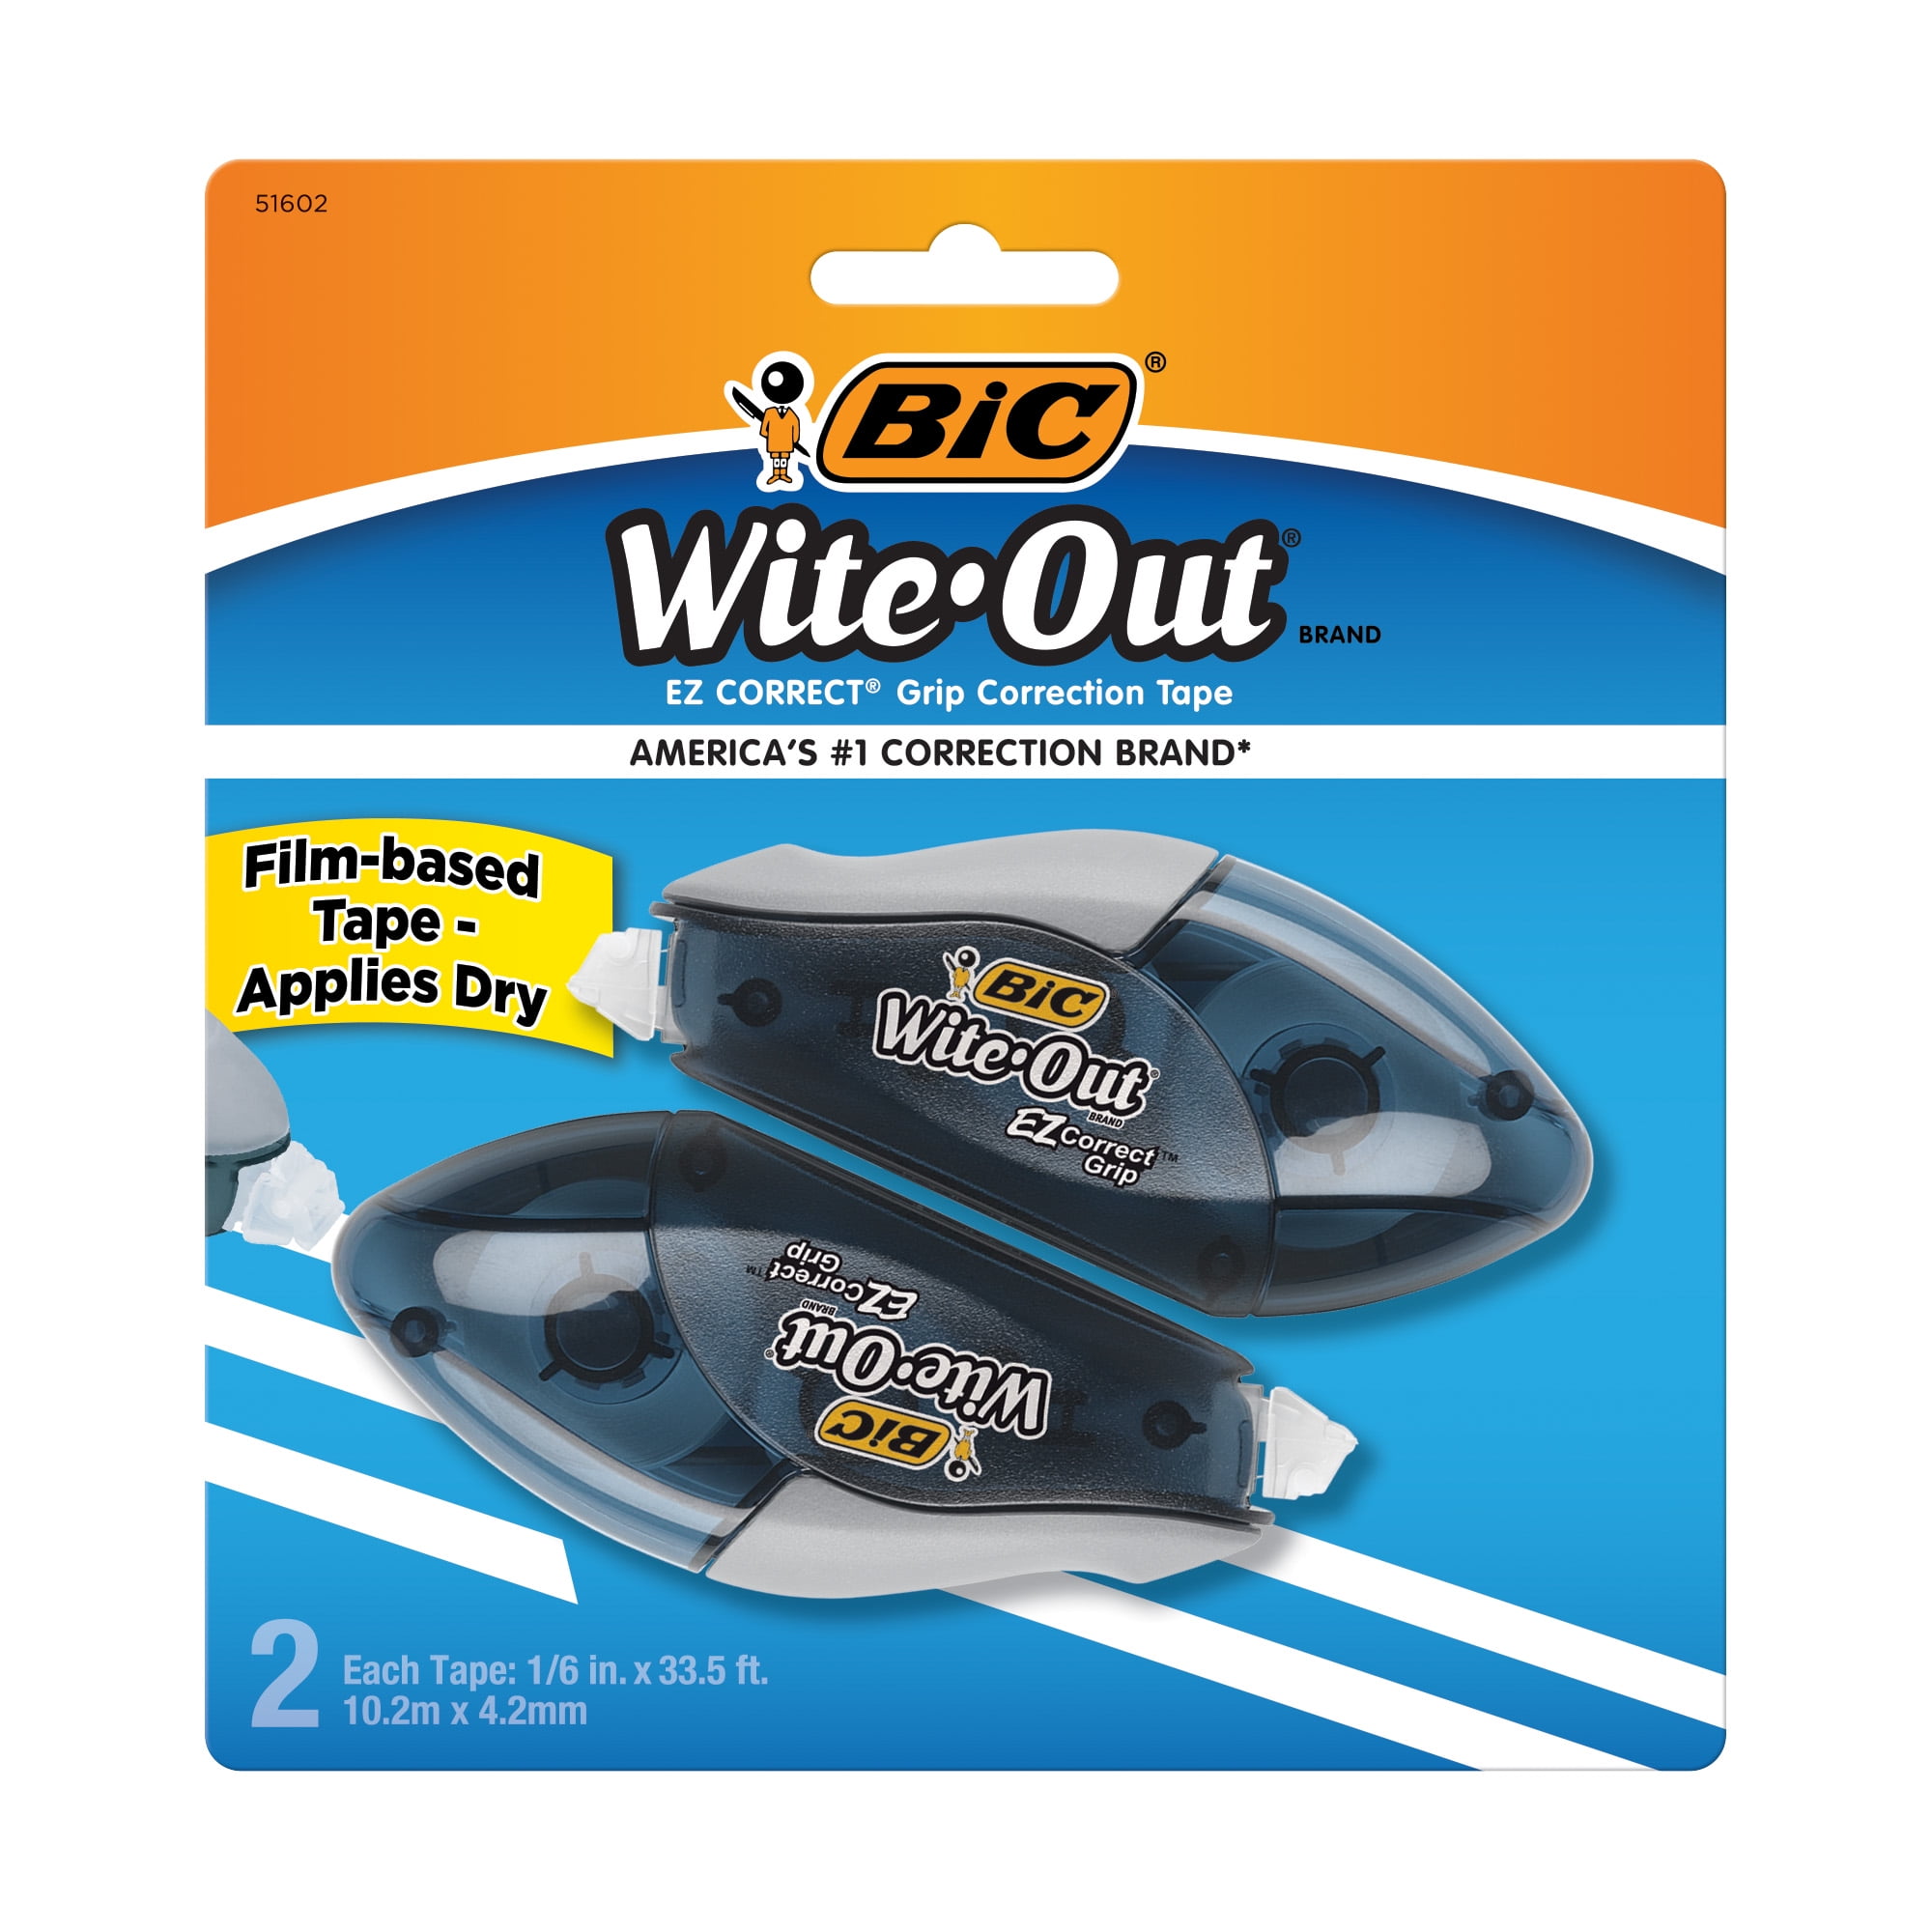 Bic Wite Out Brand Ez Correct Grip Correction Tape White 2 Pack For